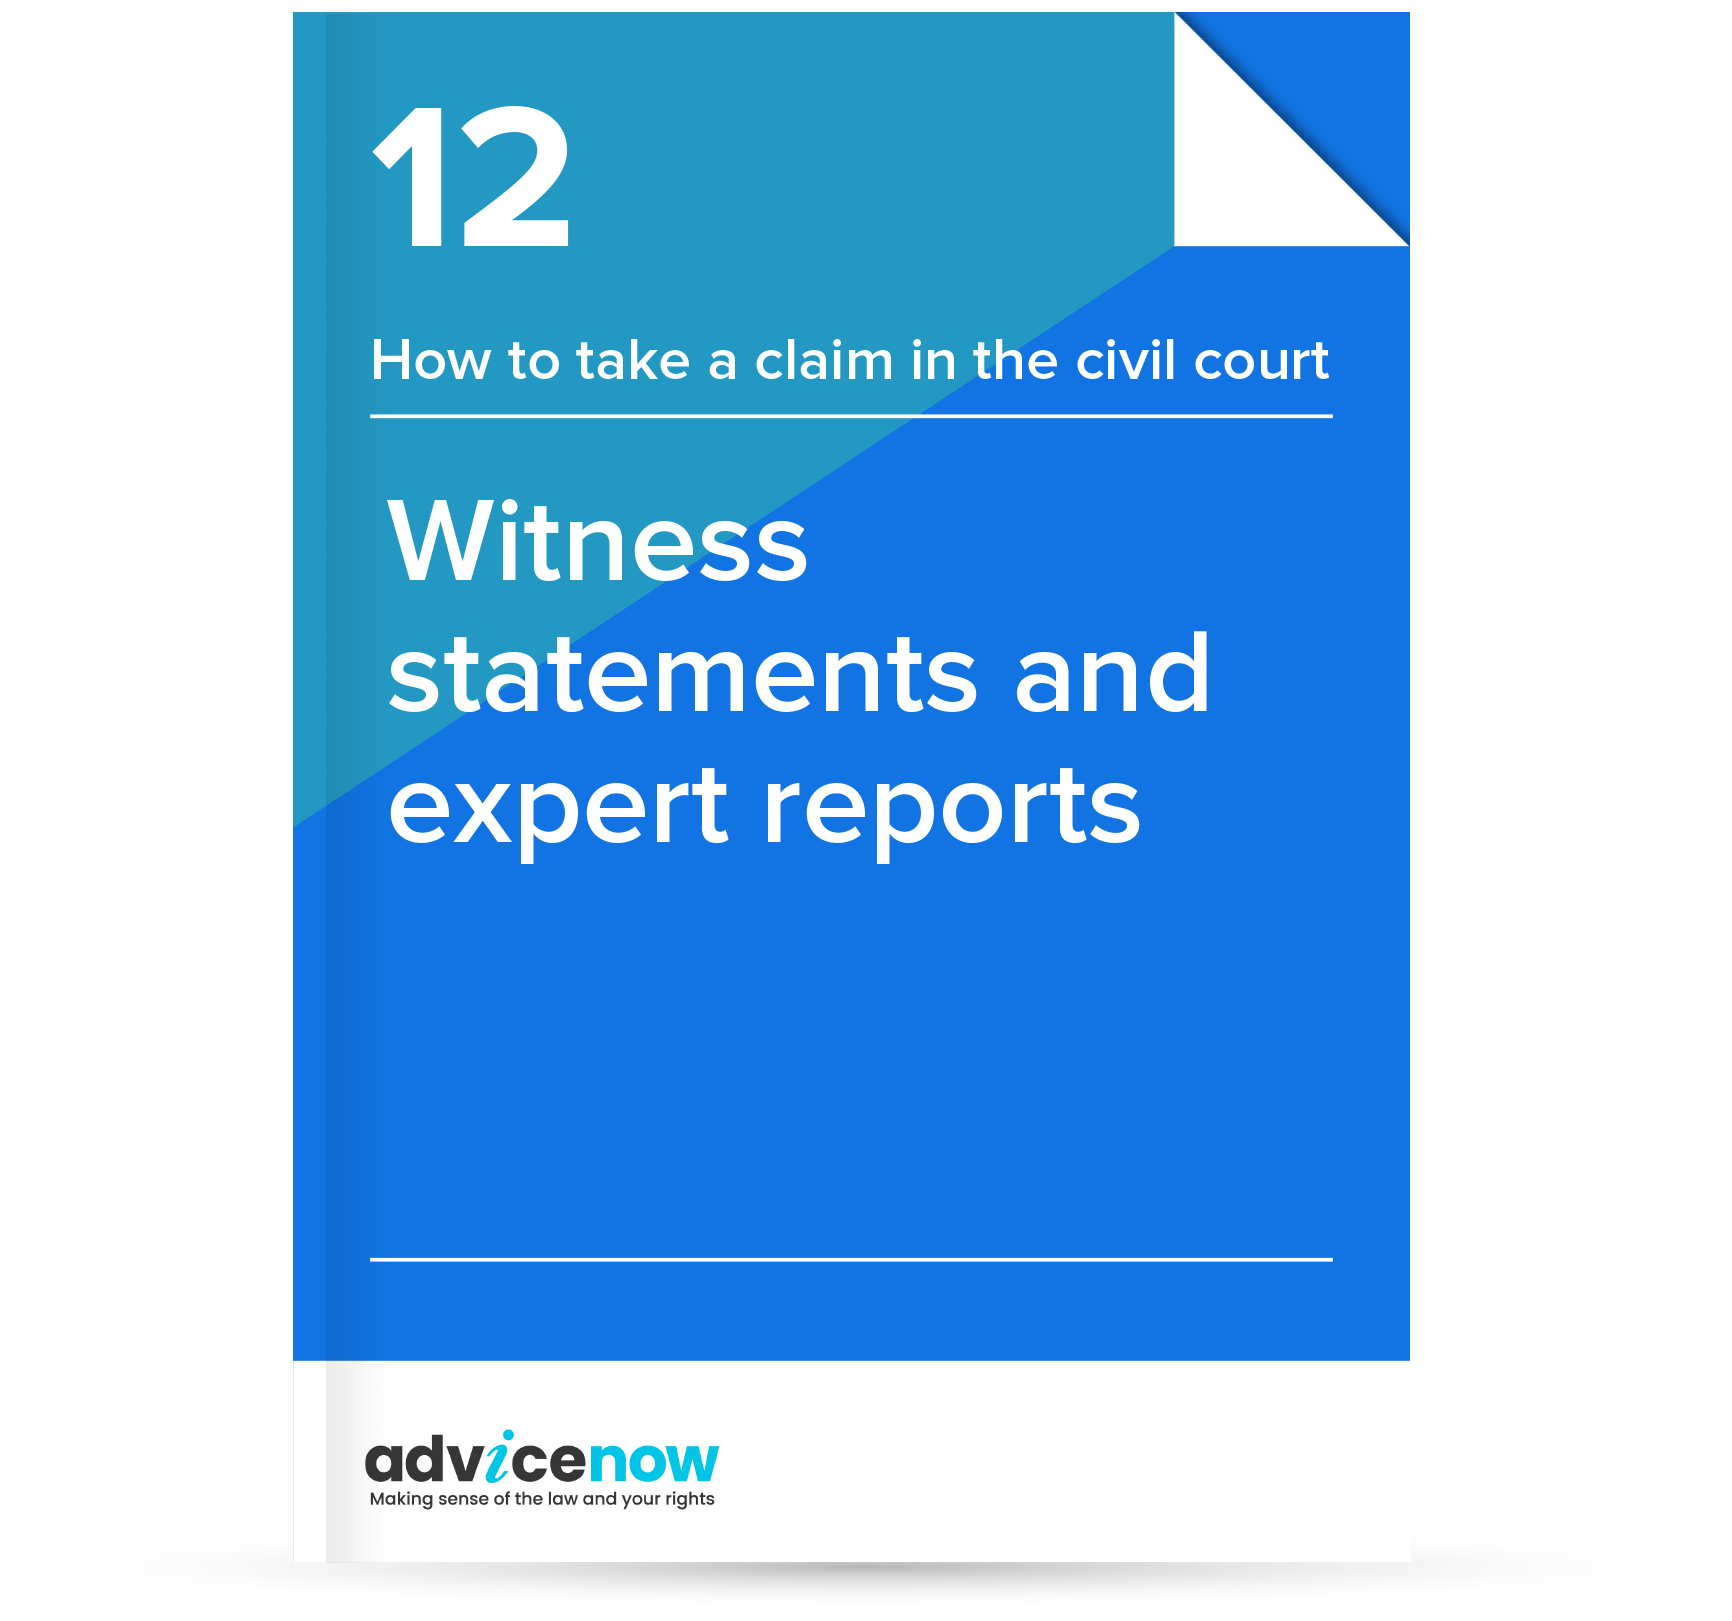 Witness statements and expert reports  Advicenow